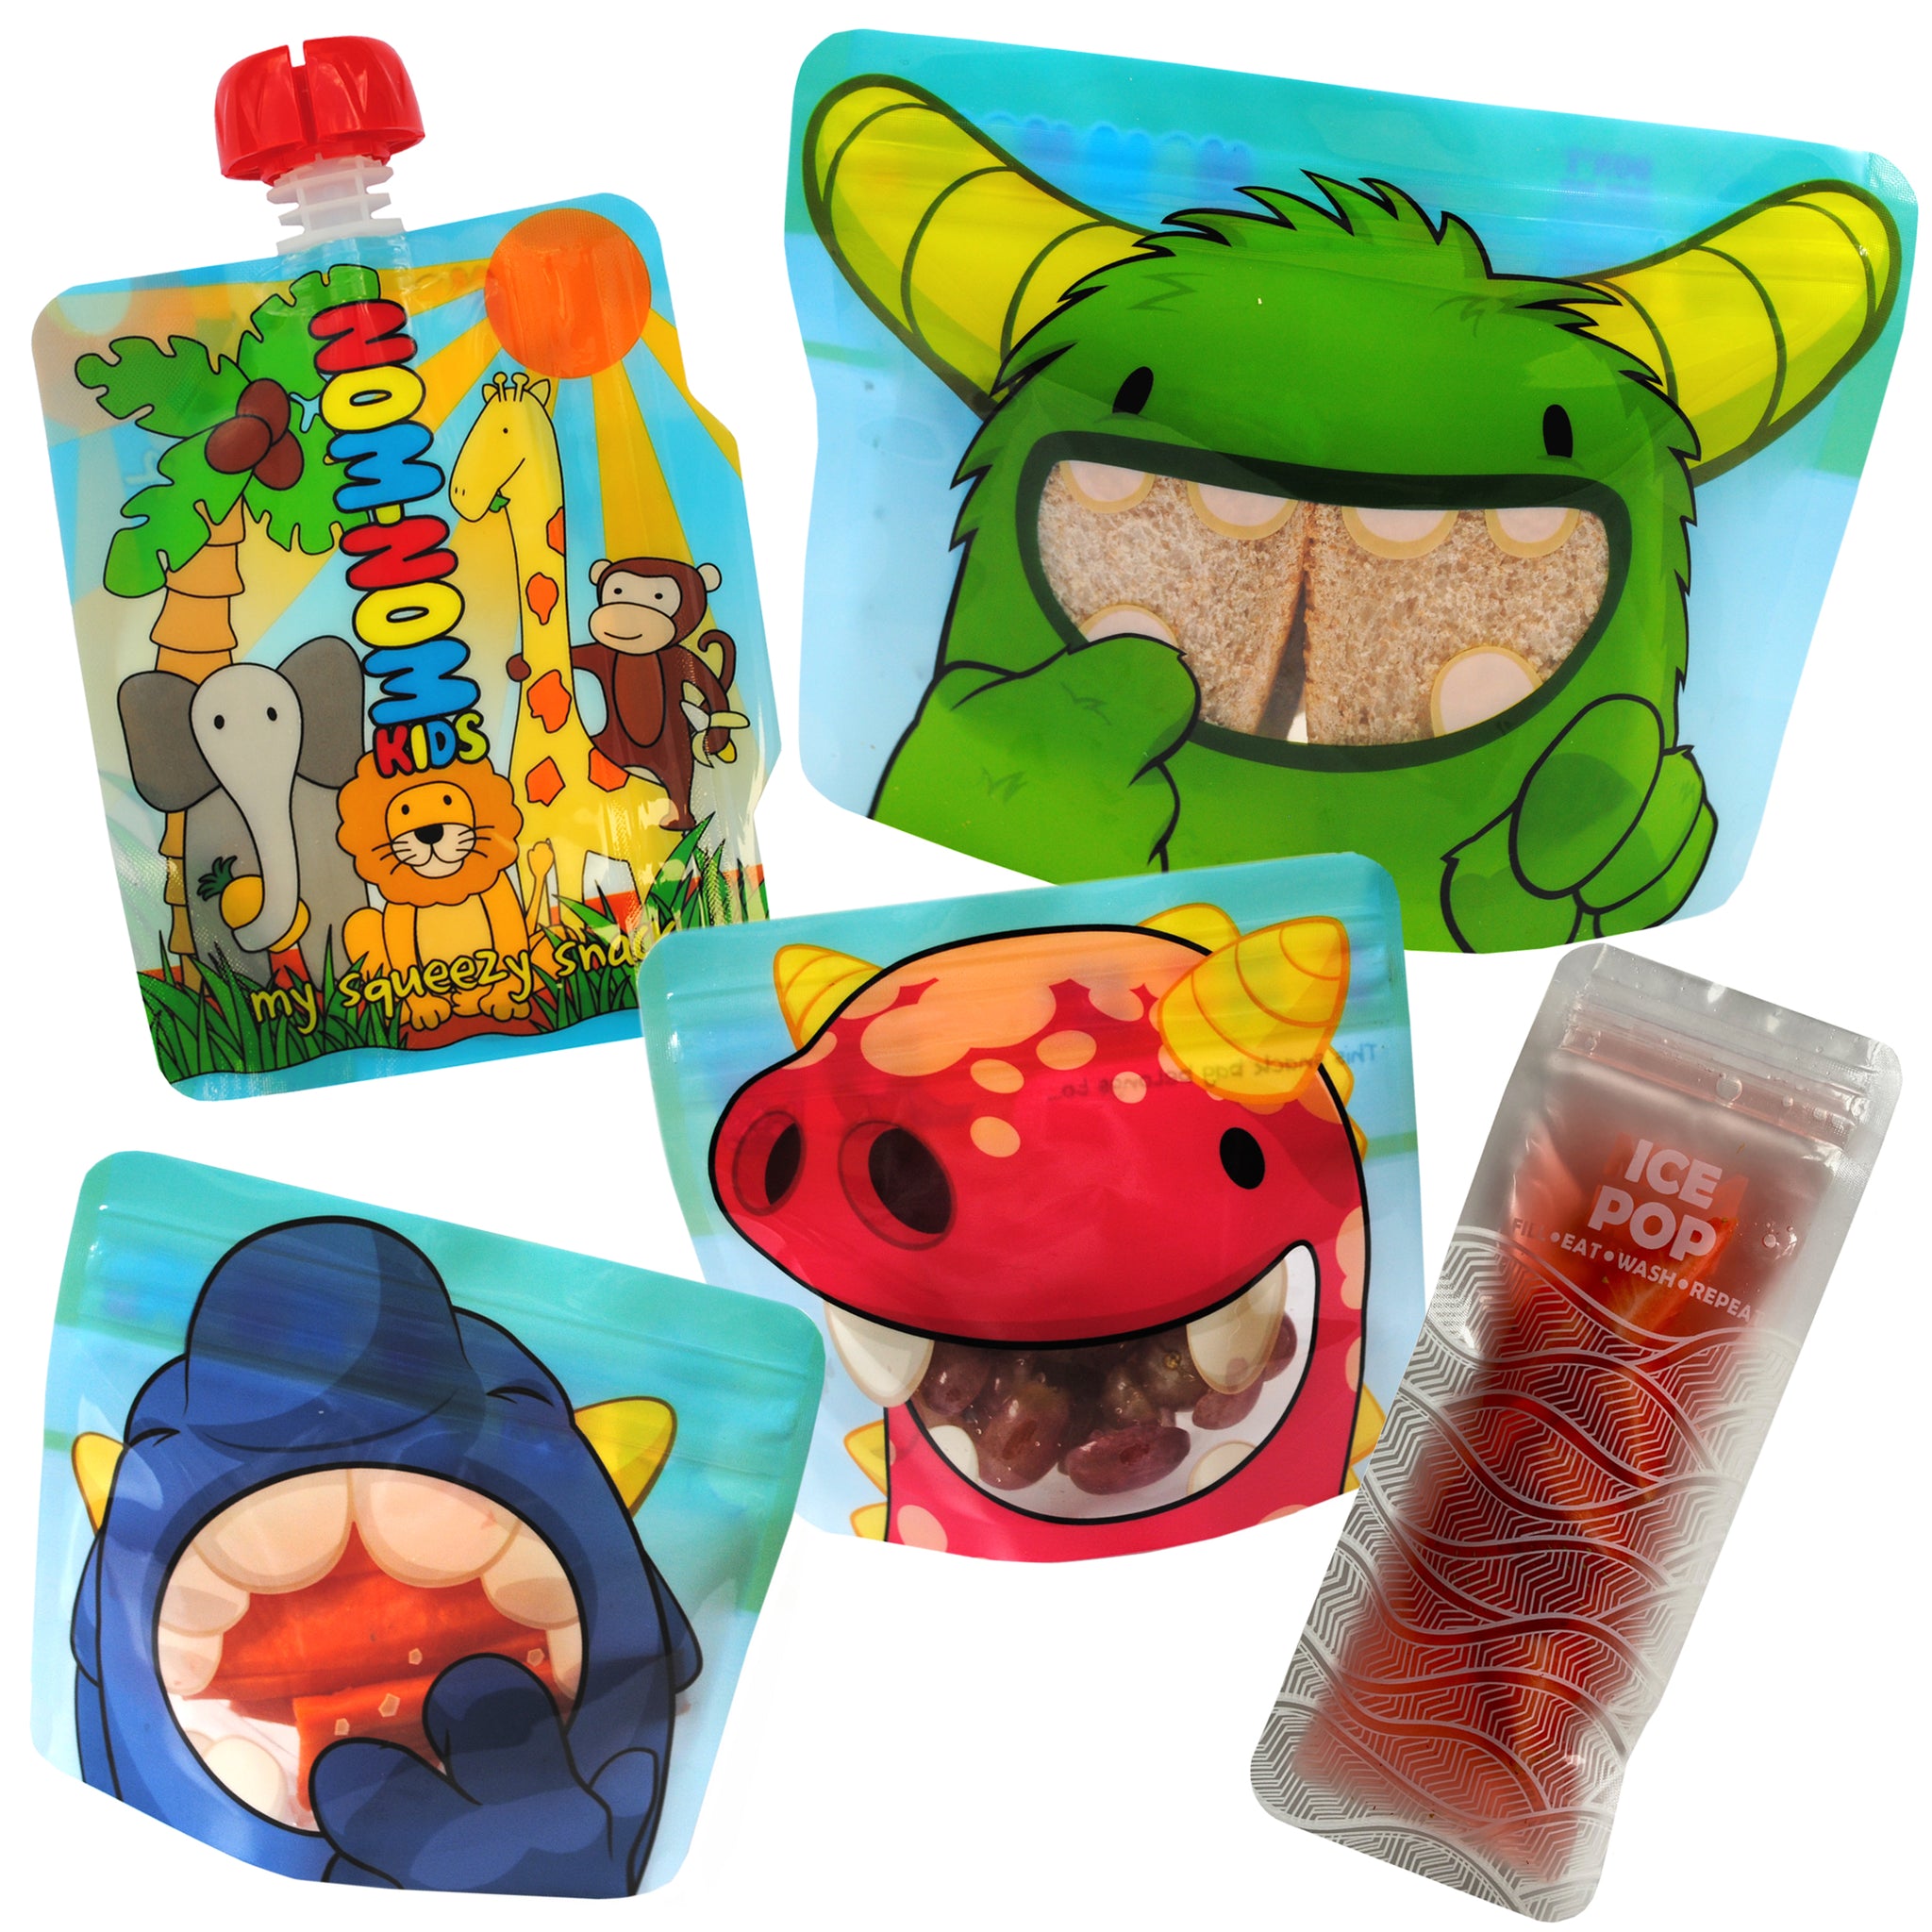 Nom Nom Kids Snack Bags are here